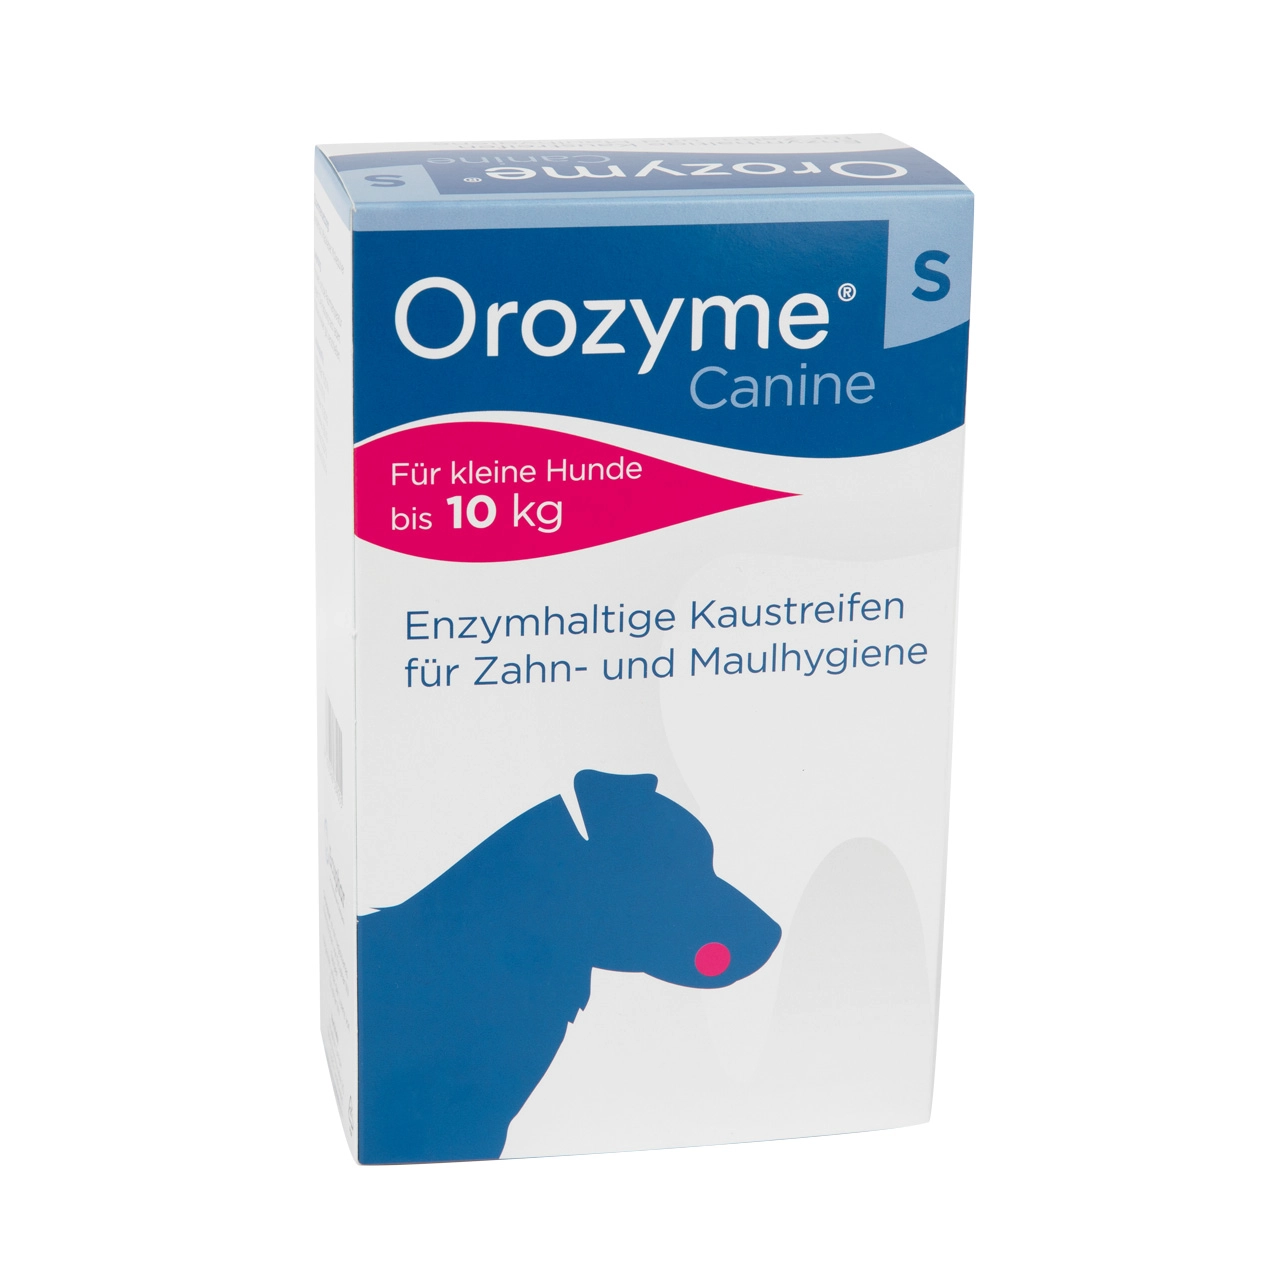 Orozyme Canine - Chewing strips for dental care